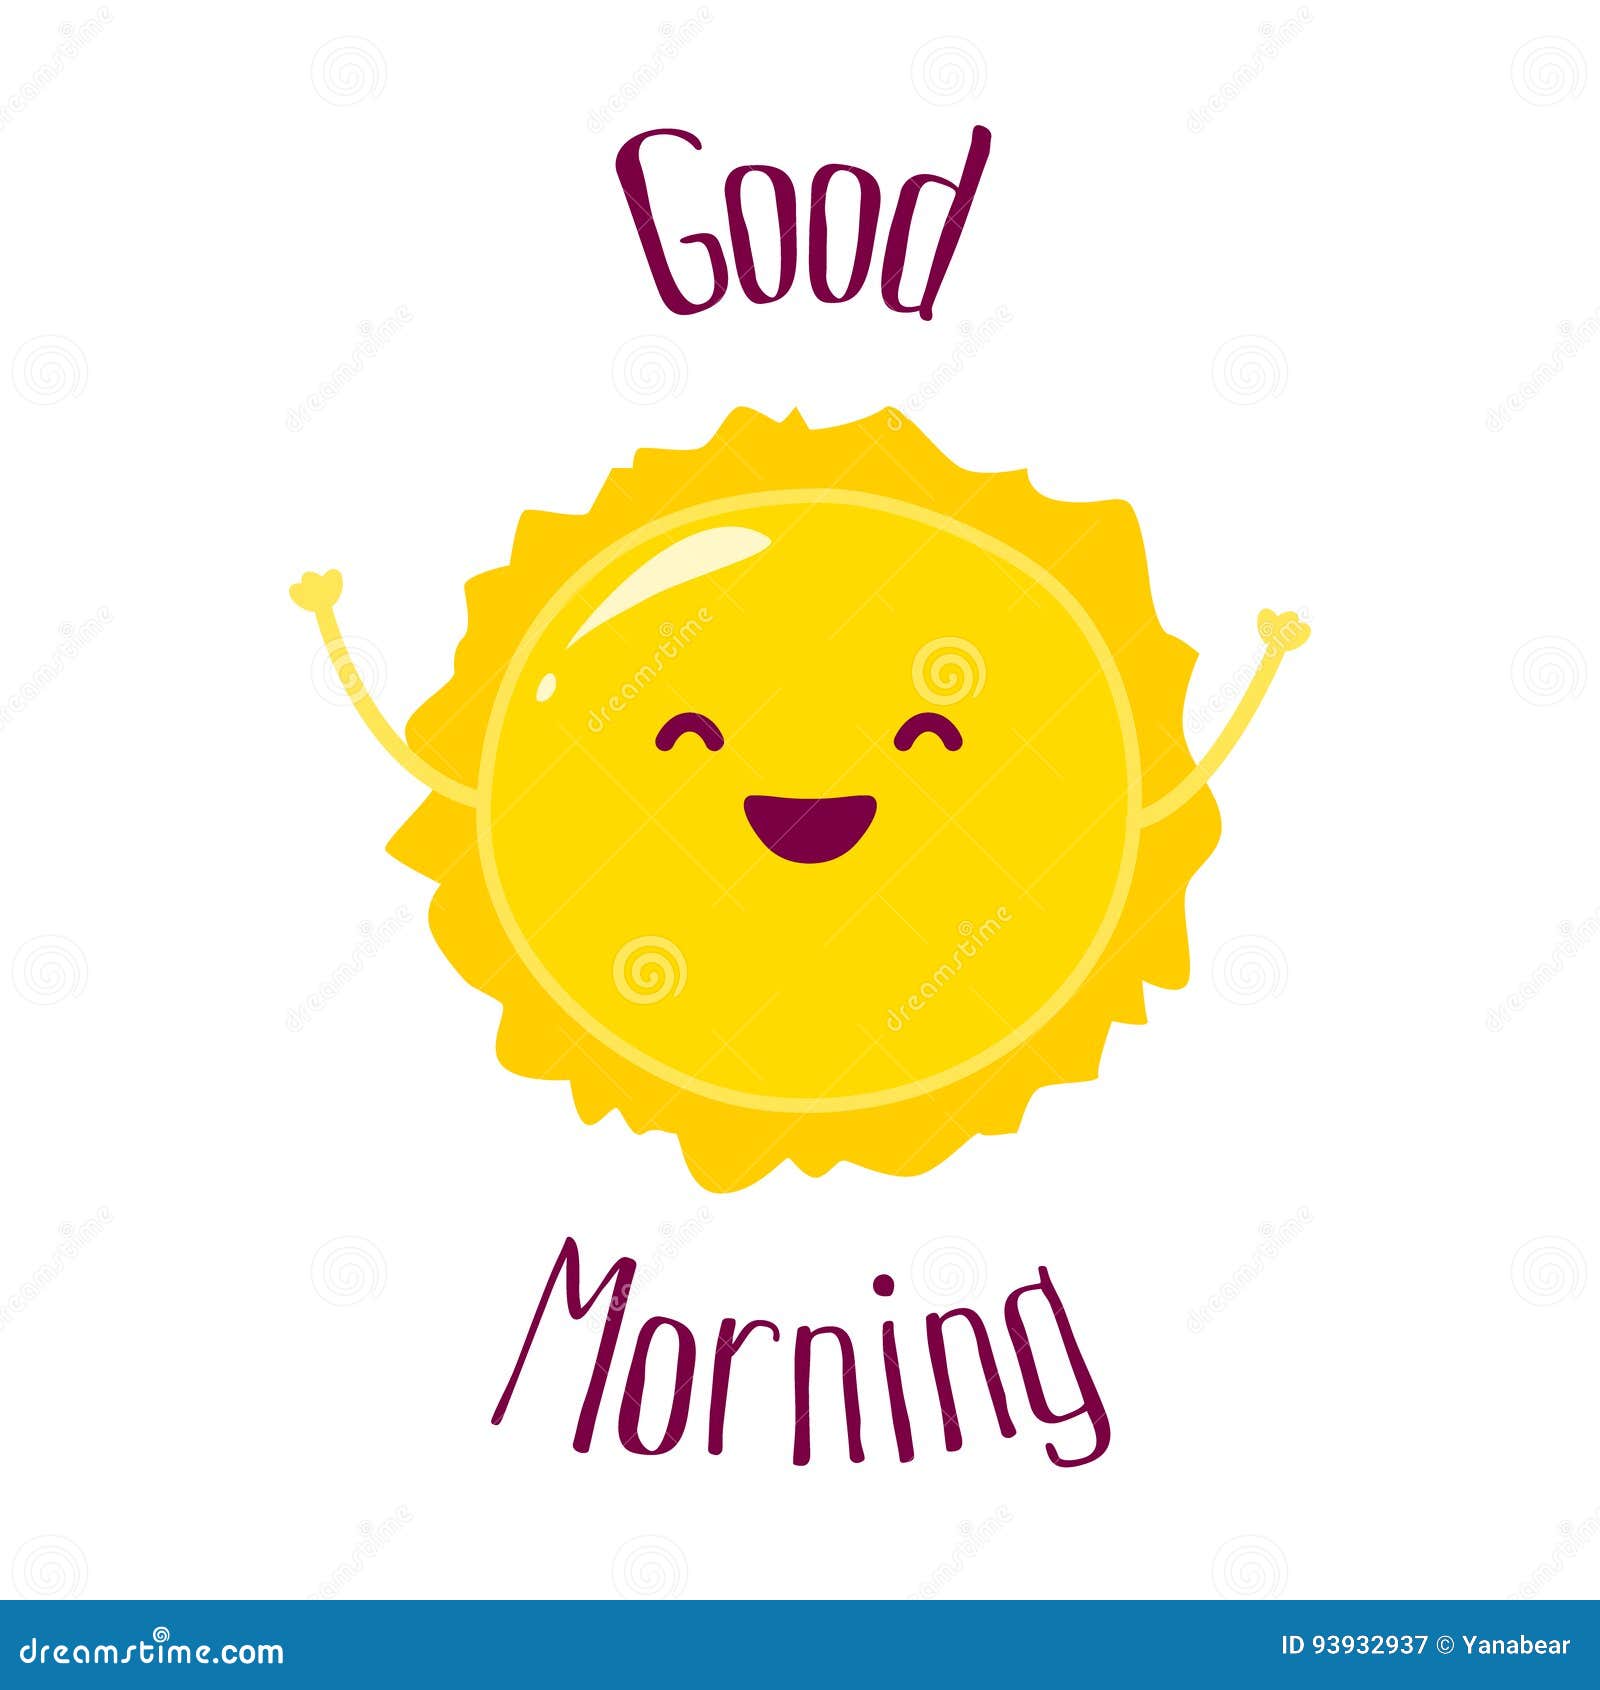 Funny Cartoon Sun Raises Hands Up and Smiles. Good Morning Card. Flat Style  Stock Vector - Illustration of card, creative: 93932937